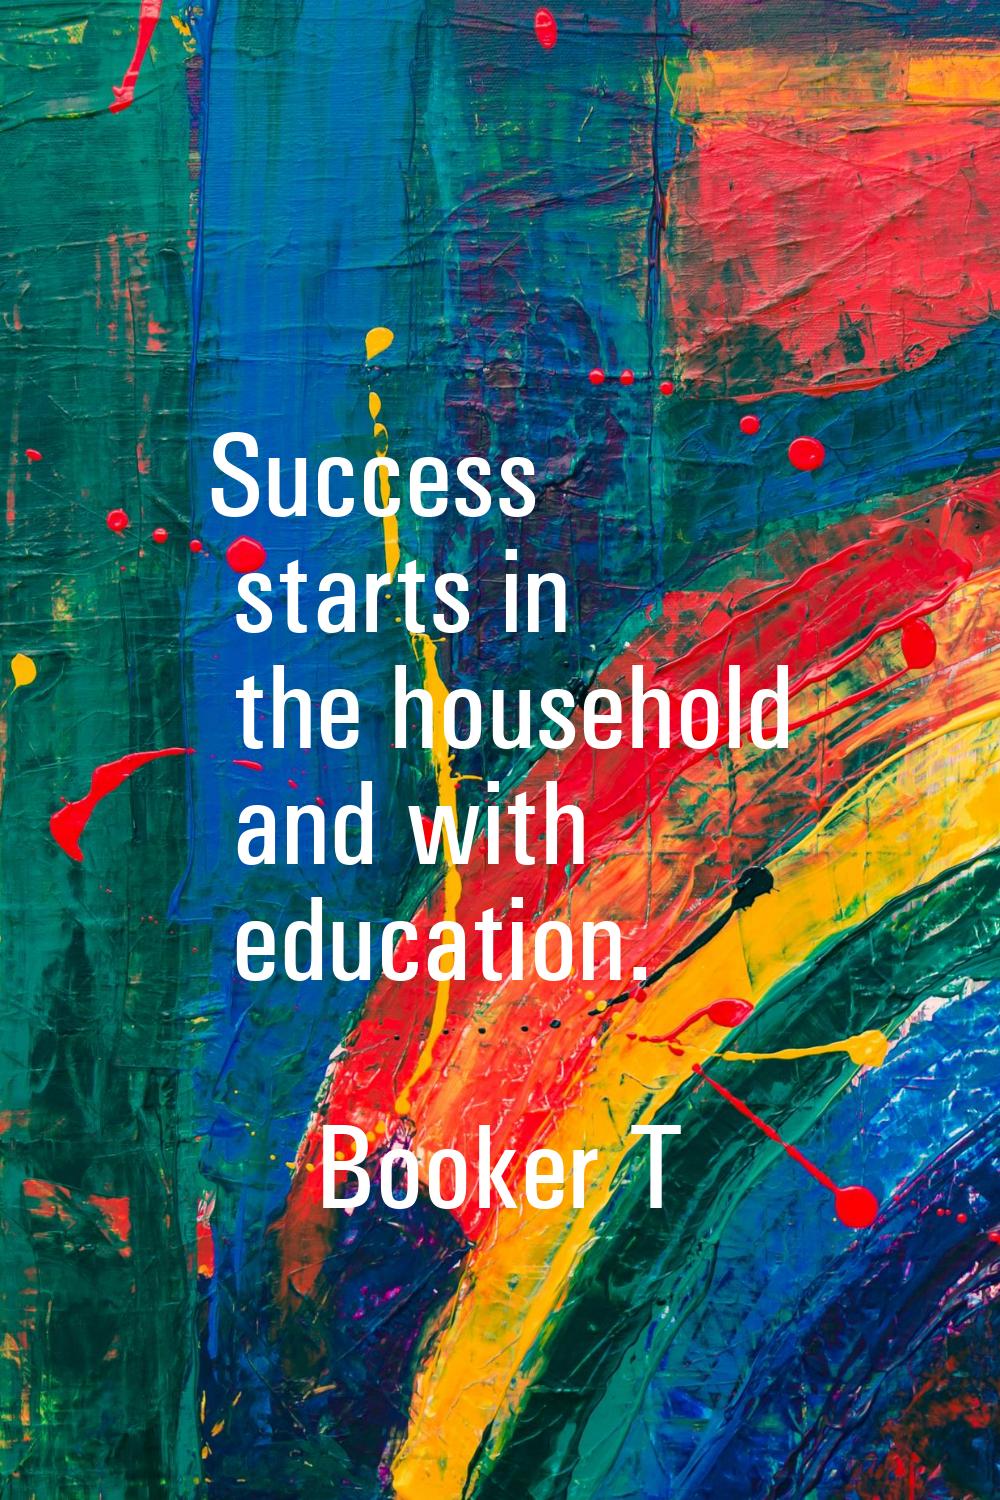 Success starts in the household and with education.